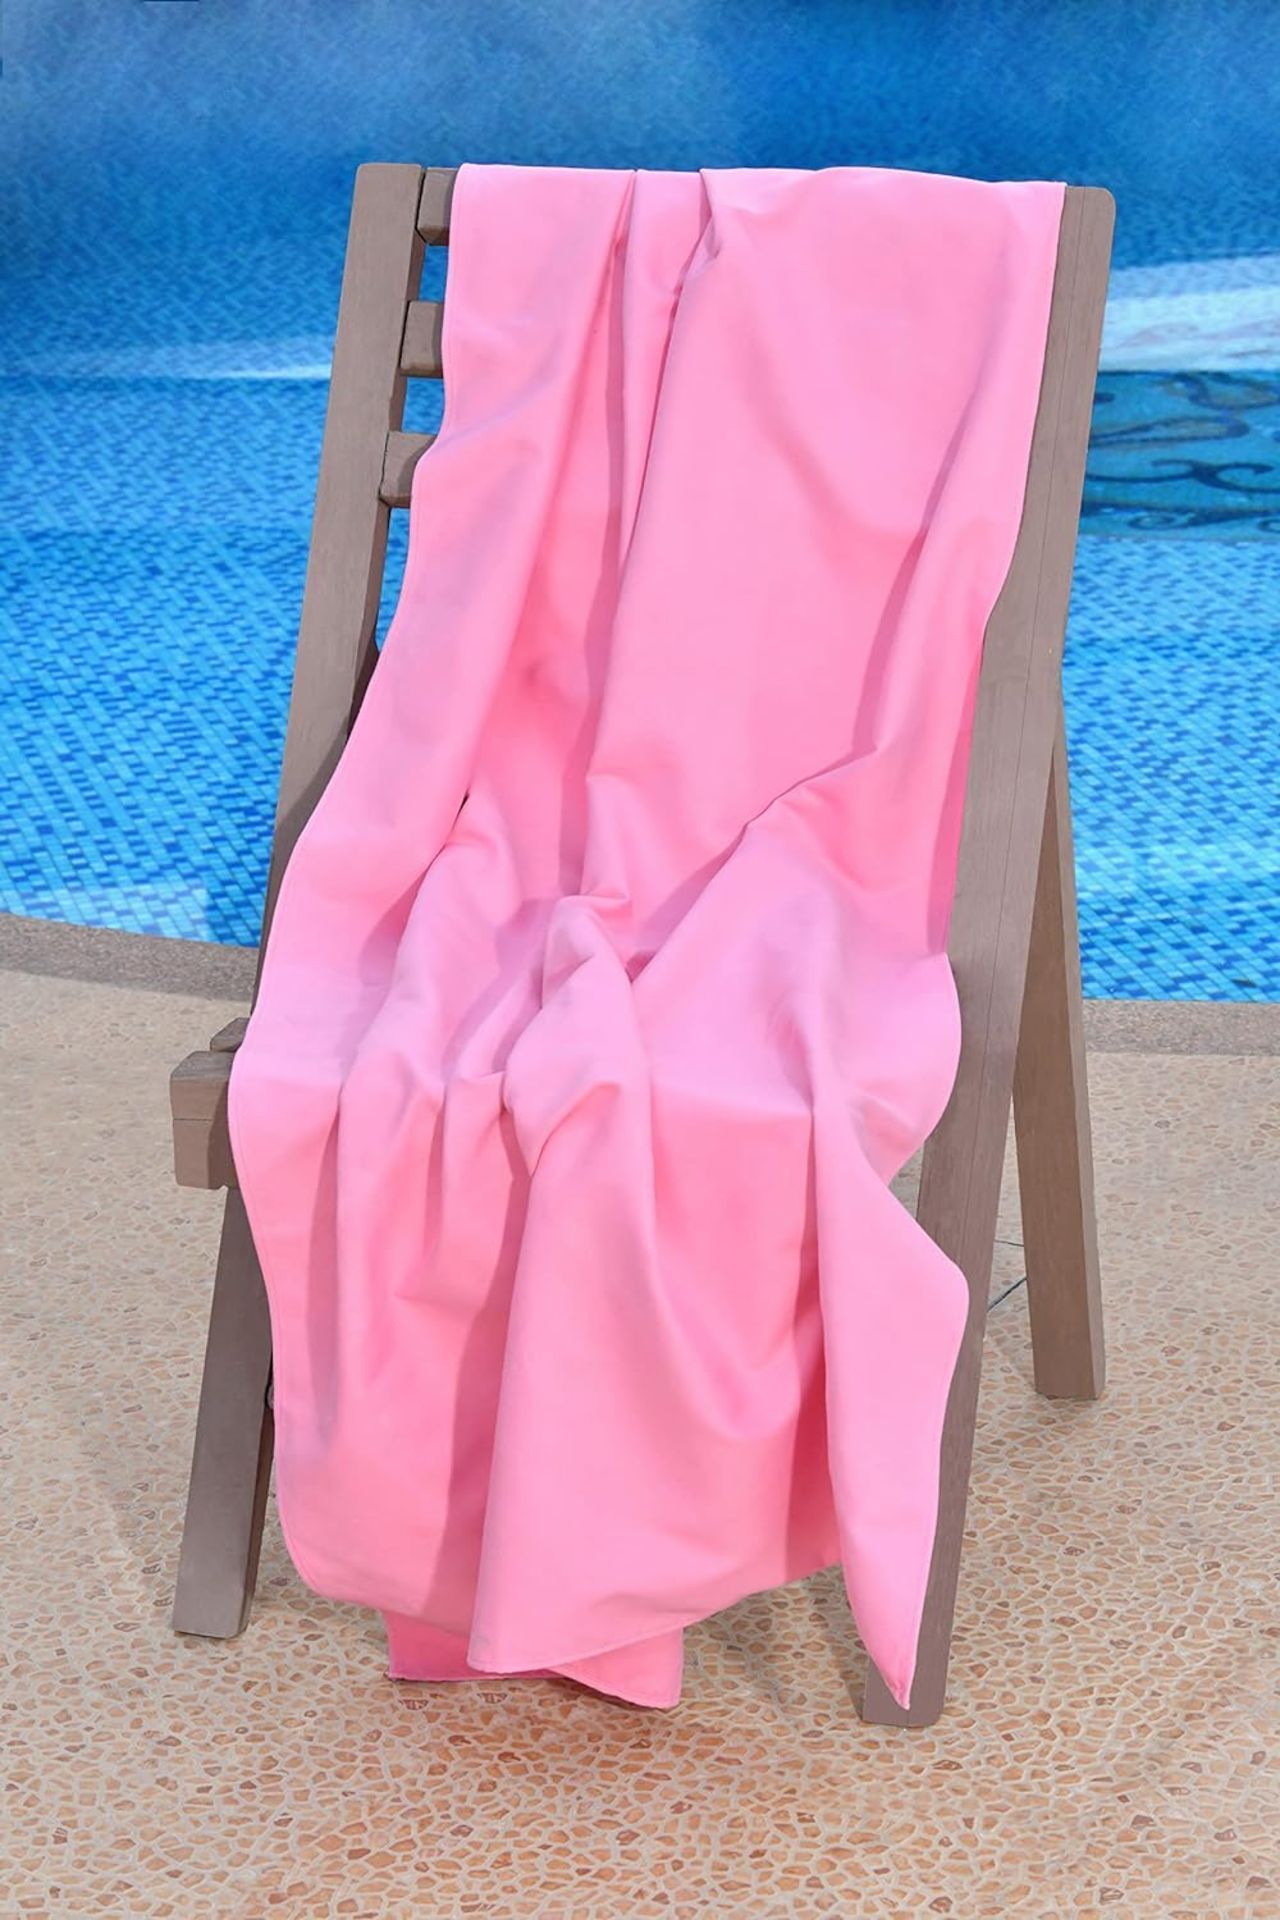 11x NEW & PACKAGED SLEEPDOWN Quick Dry Beach Towel 90 x 160cm With Carry Pouch - PINK. RRP £21.99 - Image 2 of 6